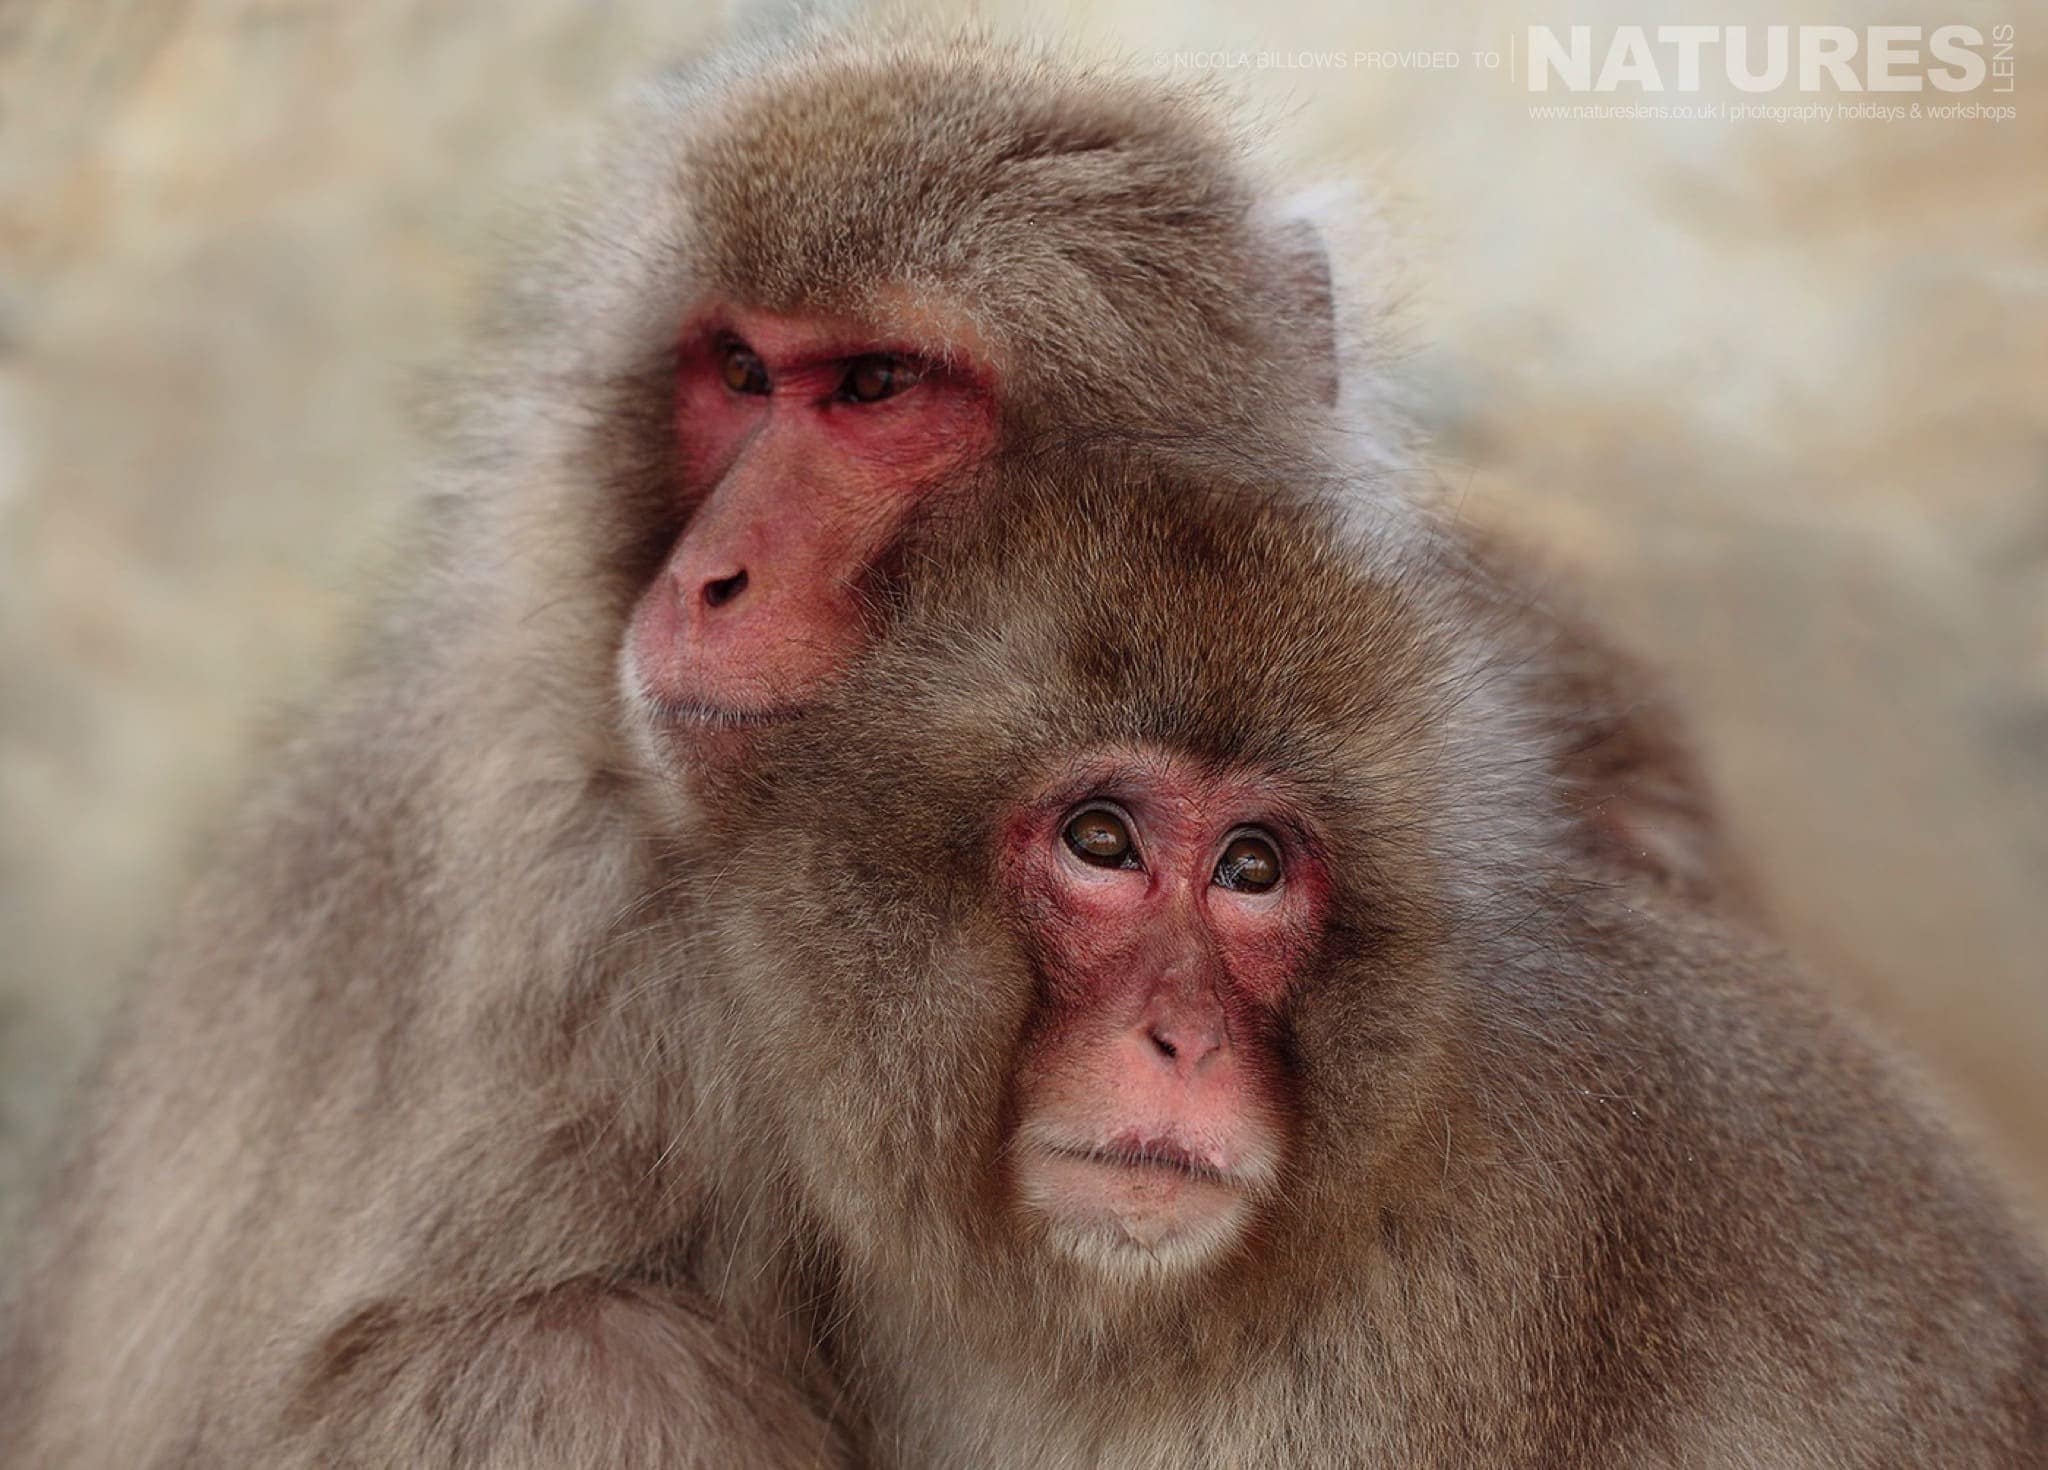 A pair of huddled snow monkeys of Hells Valley on the main island of Japan photographed by Nicola Billows during the NaturesLens Japanese Winter Wildlife Photography Holiday